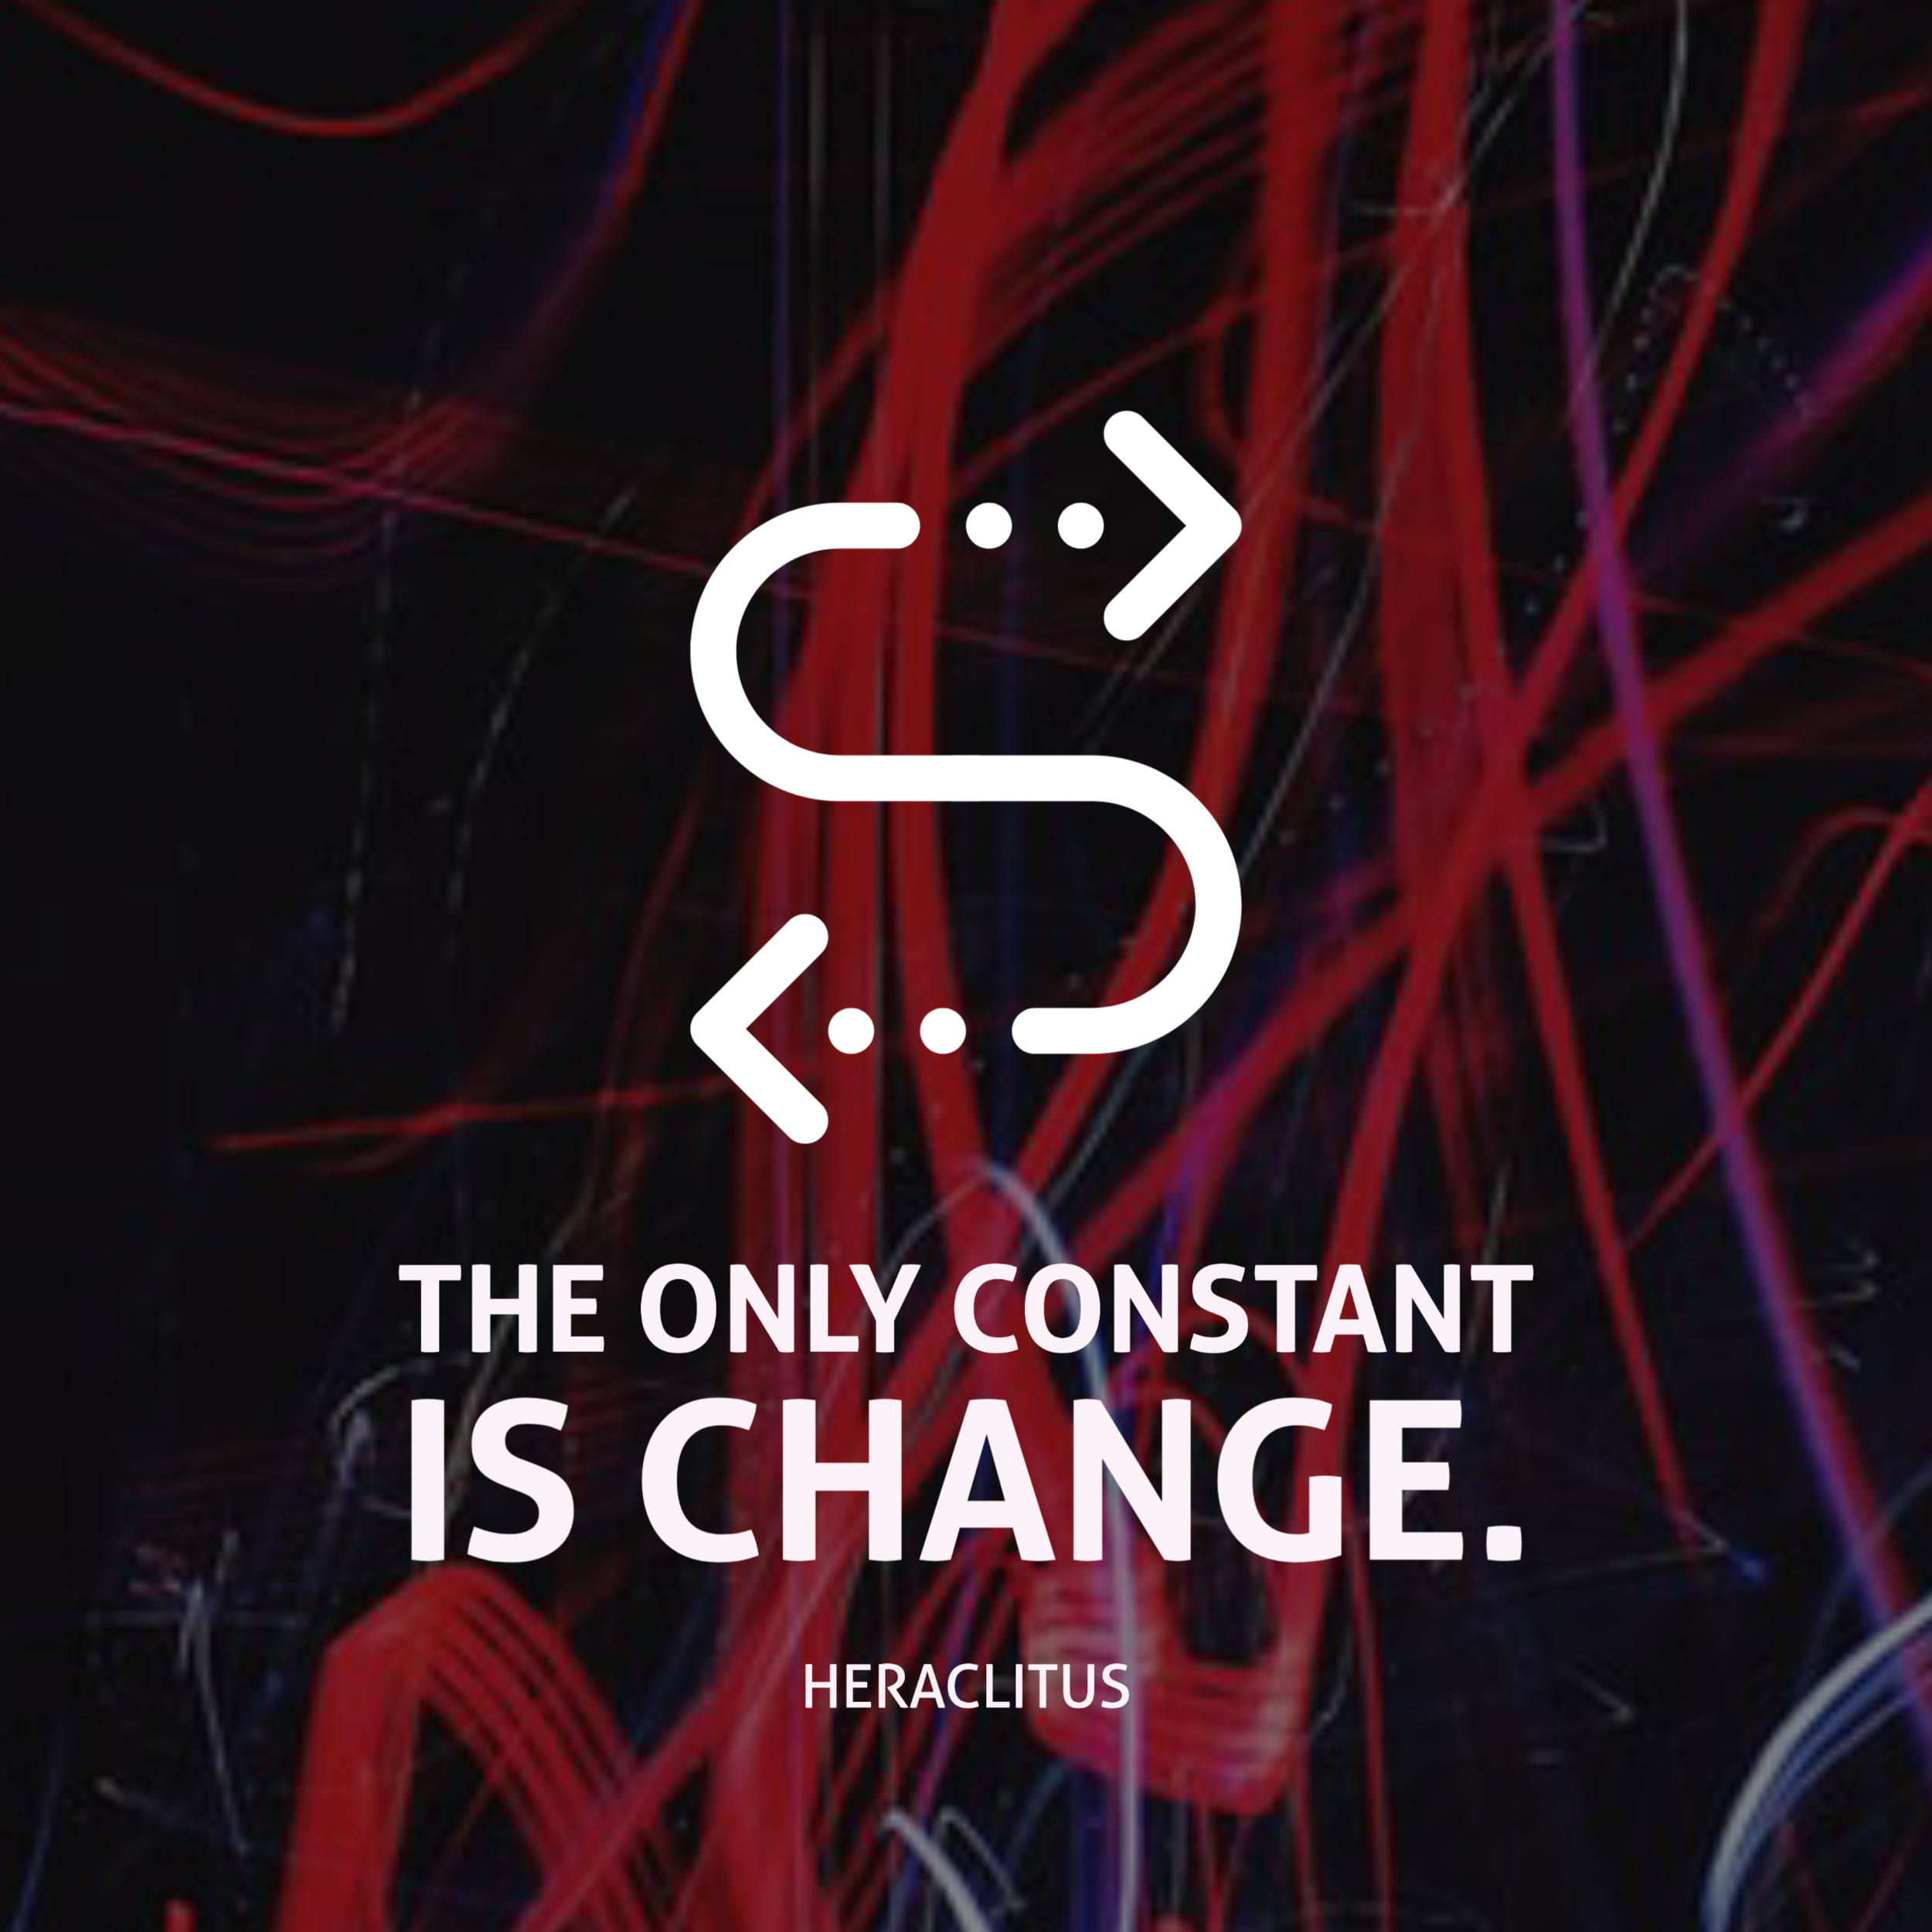 “The only constant in life is change”-Heraclitus